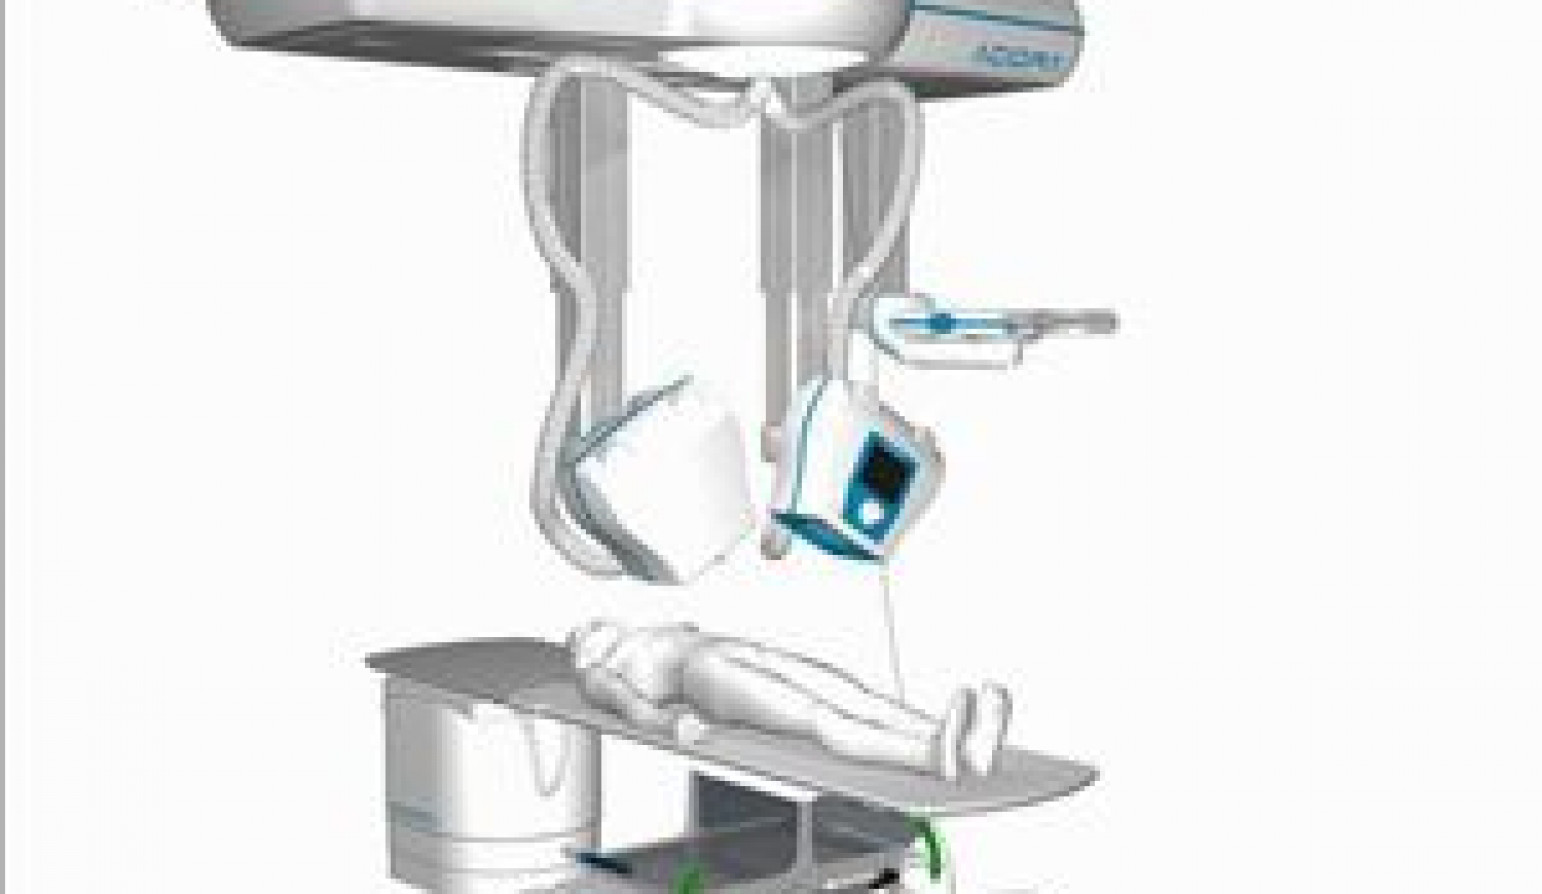 HOW THE ADORA RSA X-RAY SYSTEM WILL IMPROVE TREATMENT IN PATIENTS WITH OSTEOPOROTIC FRACTURE